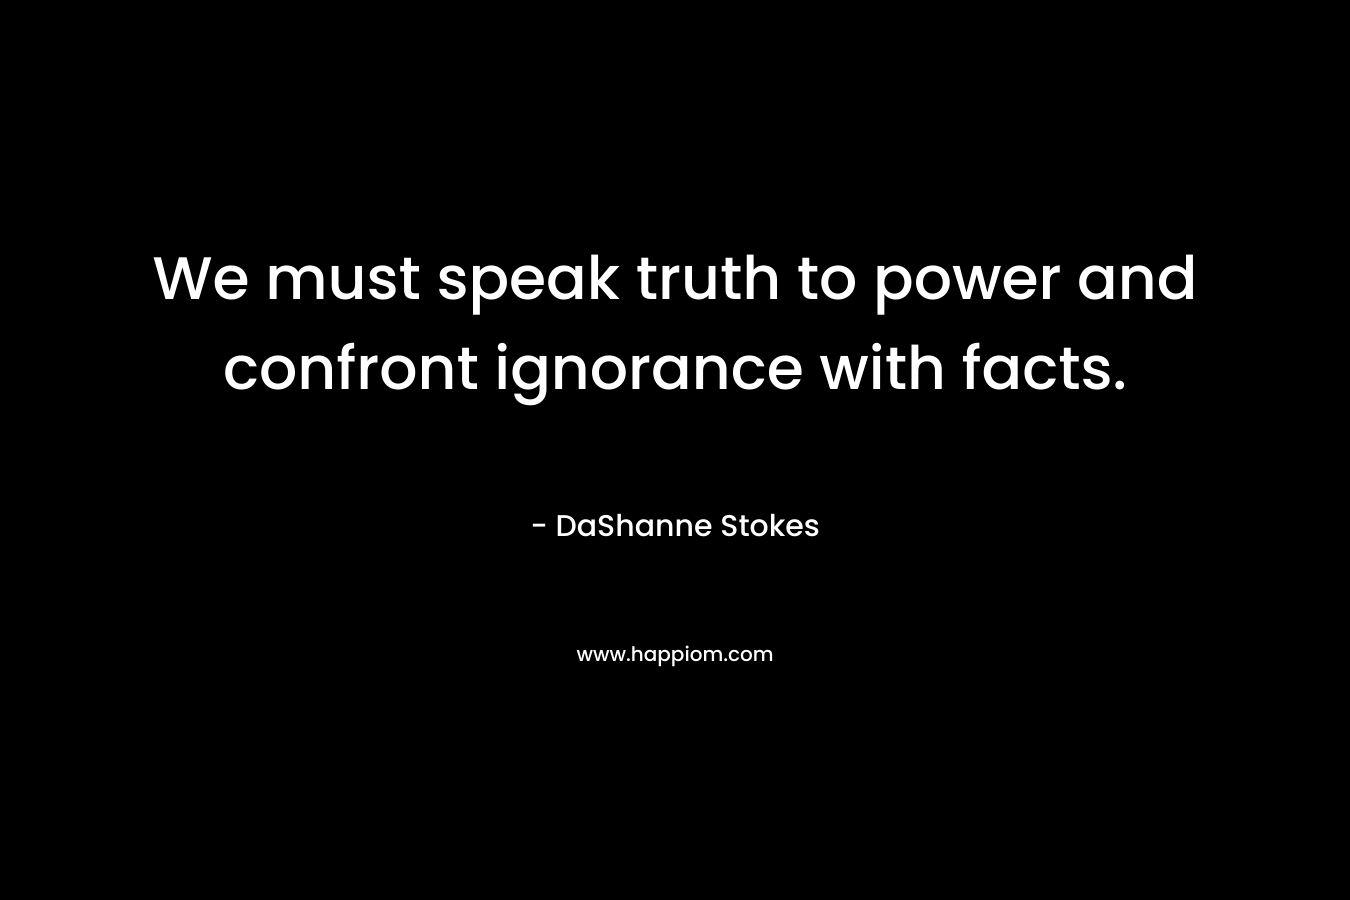 We must speak truth to power and confront ignorance with facts.